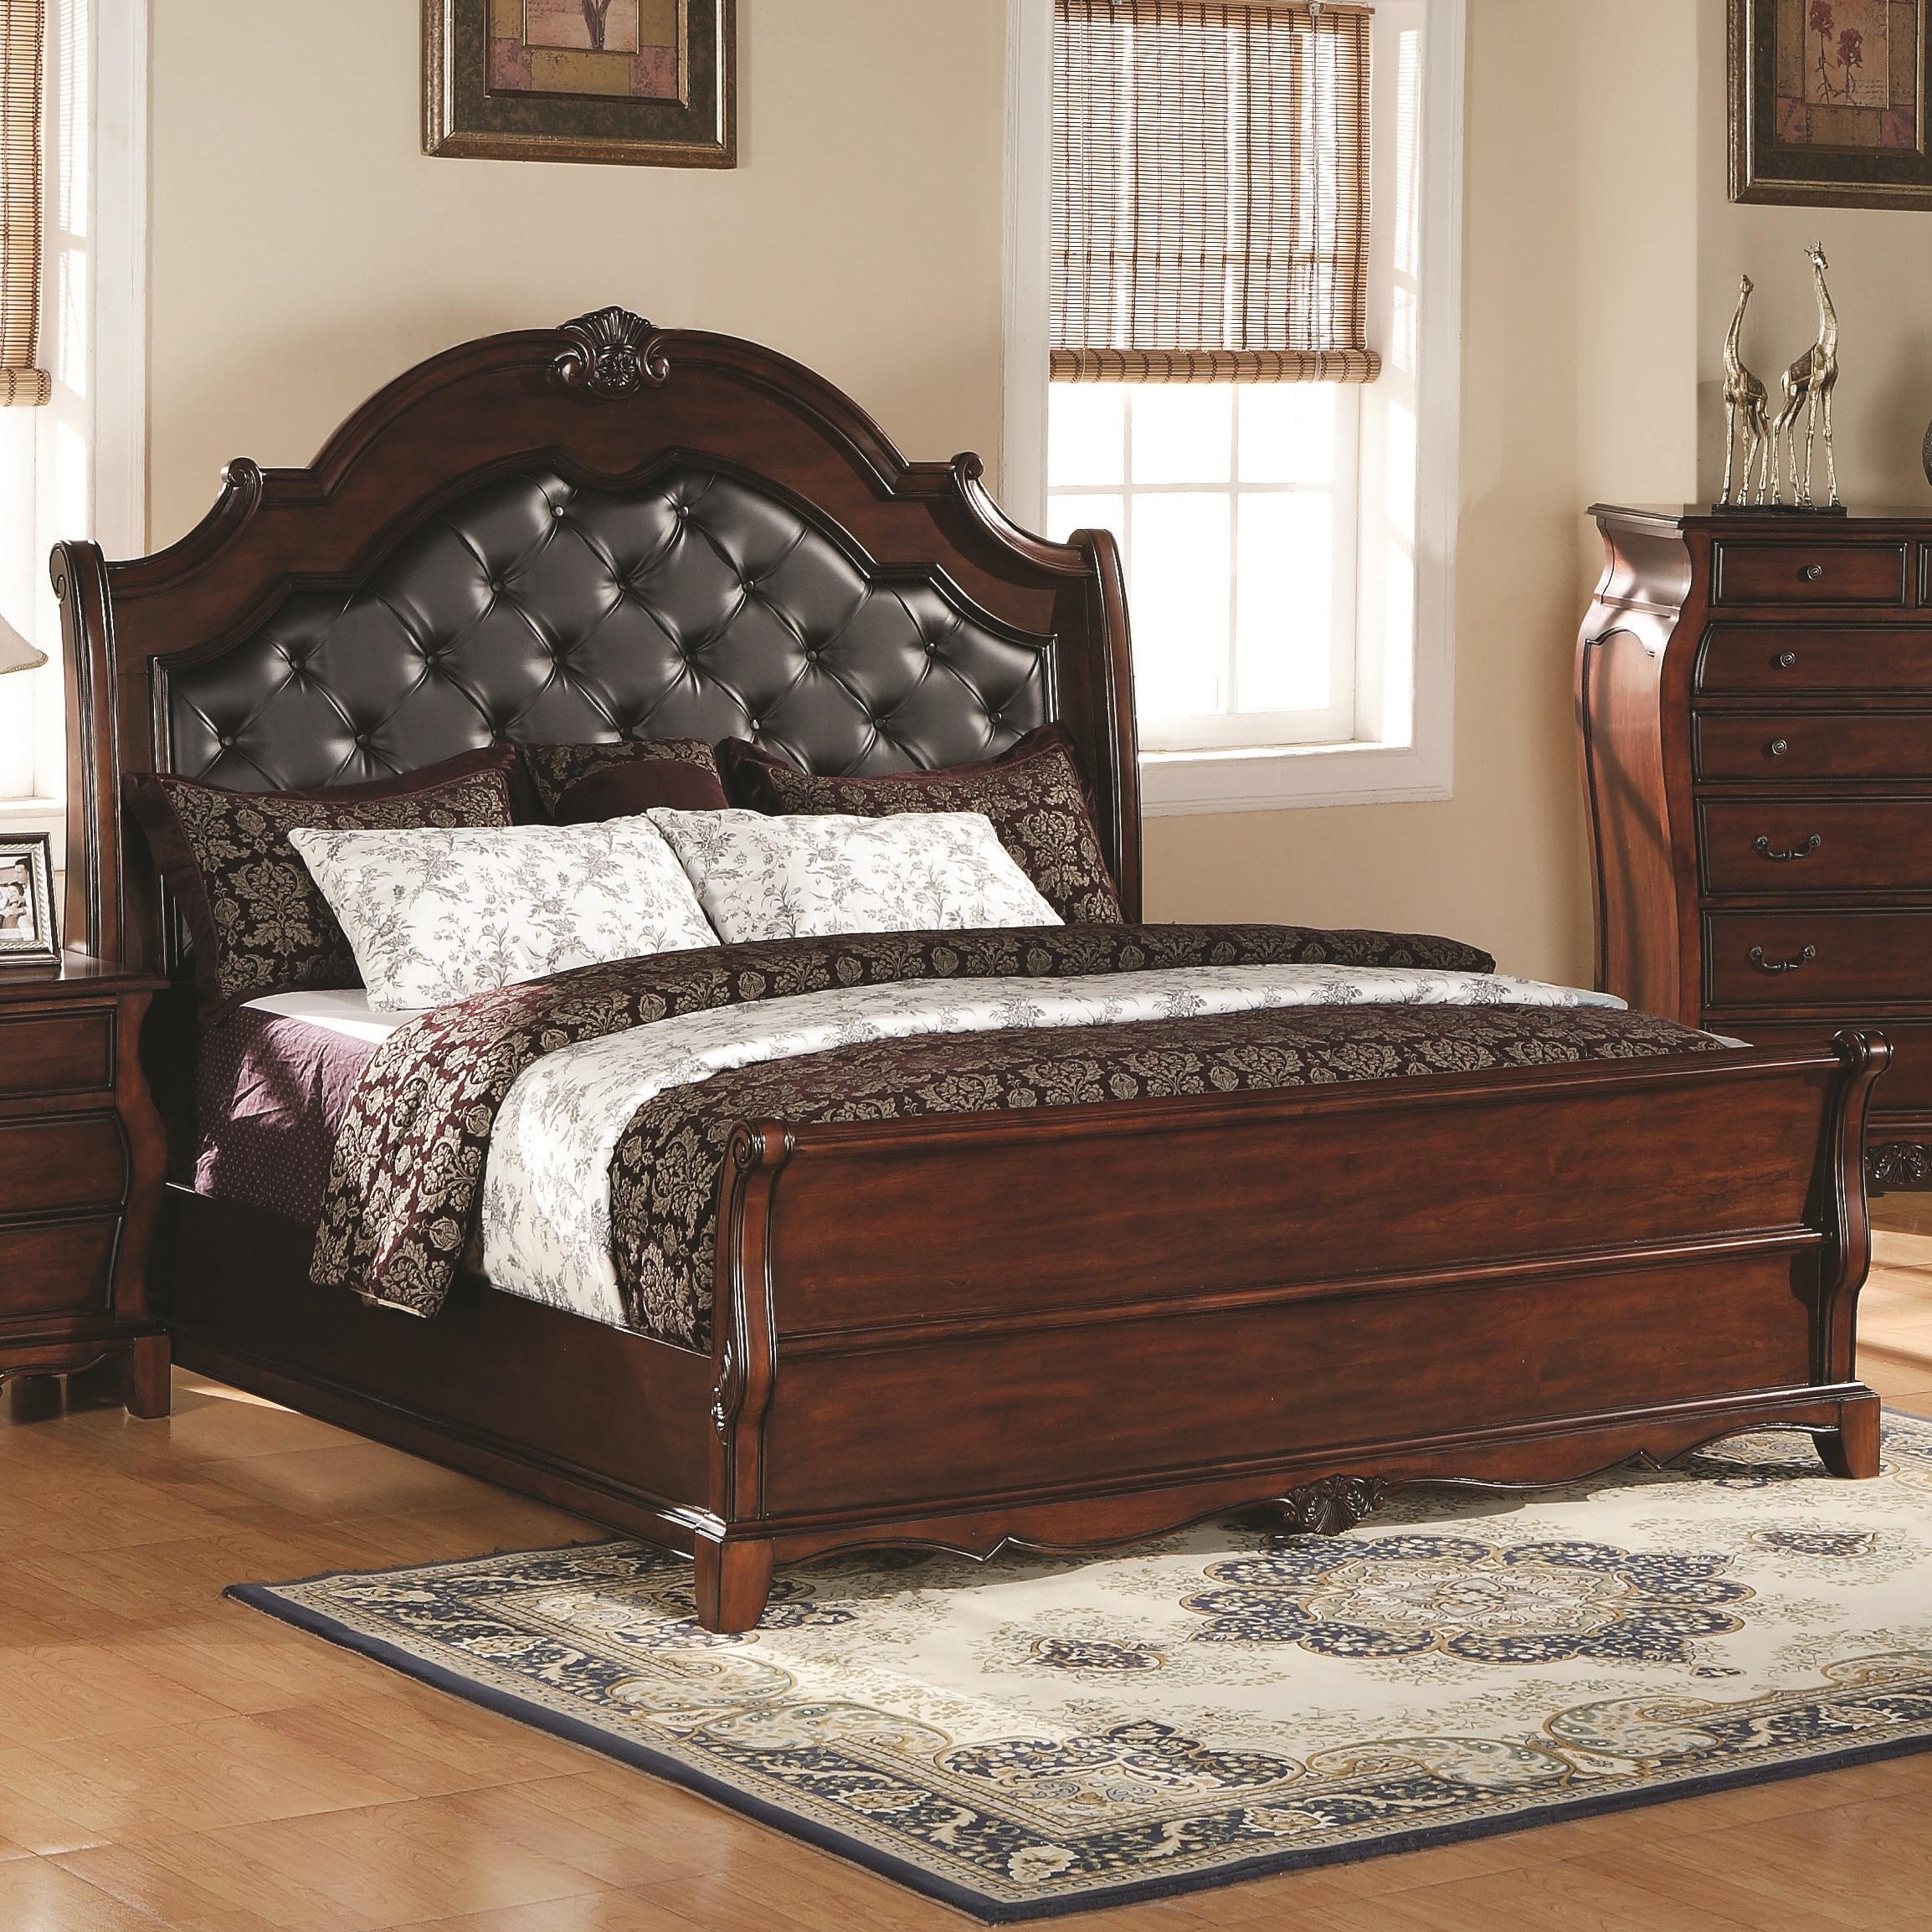 Leather and wood headboard 24